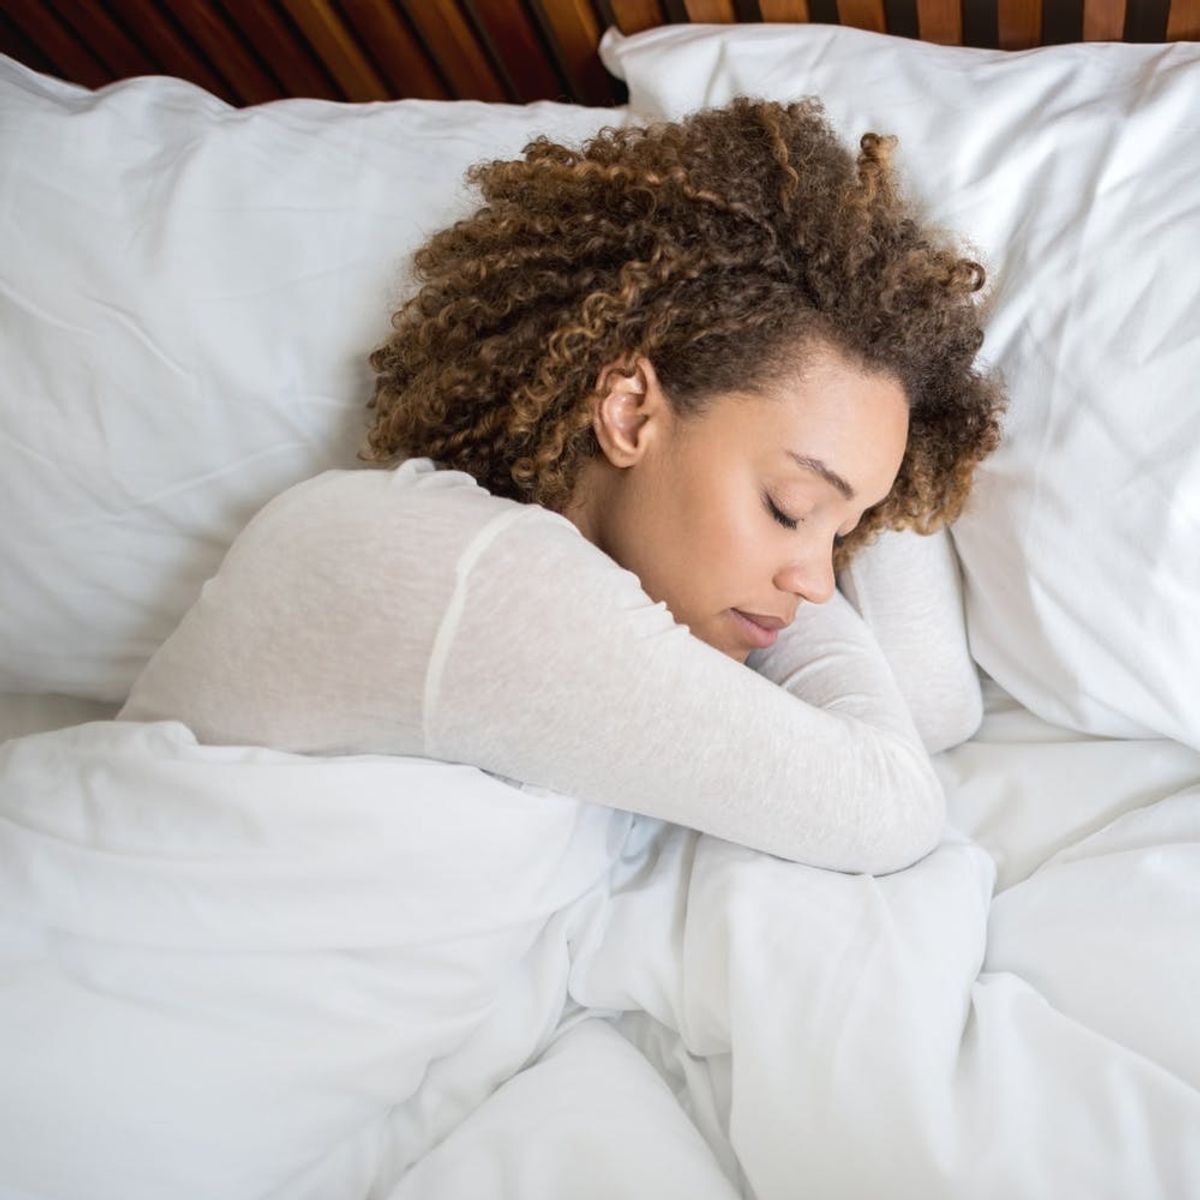 Clean Sleeping Is the Newest Health Trend We Can All Get Behind